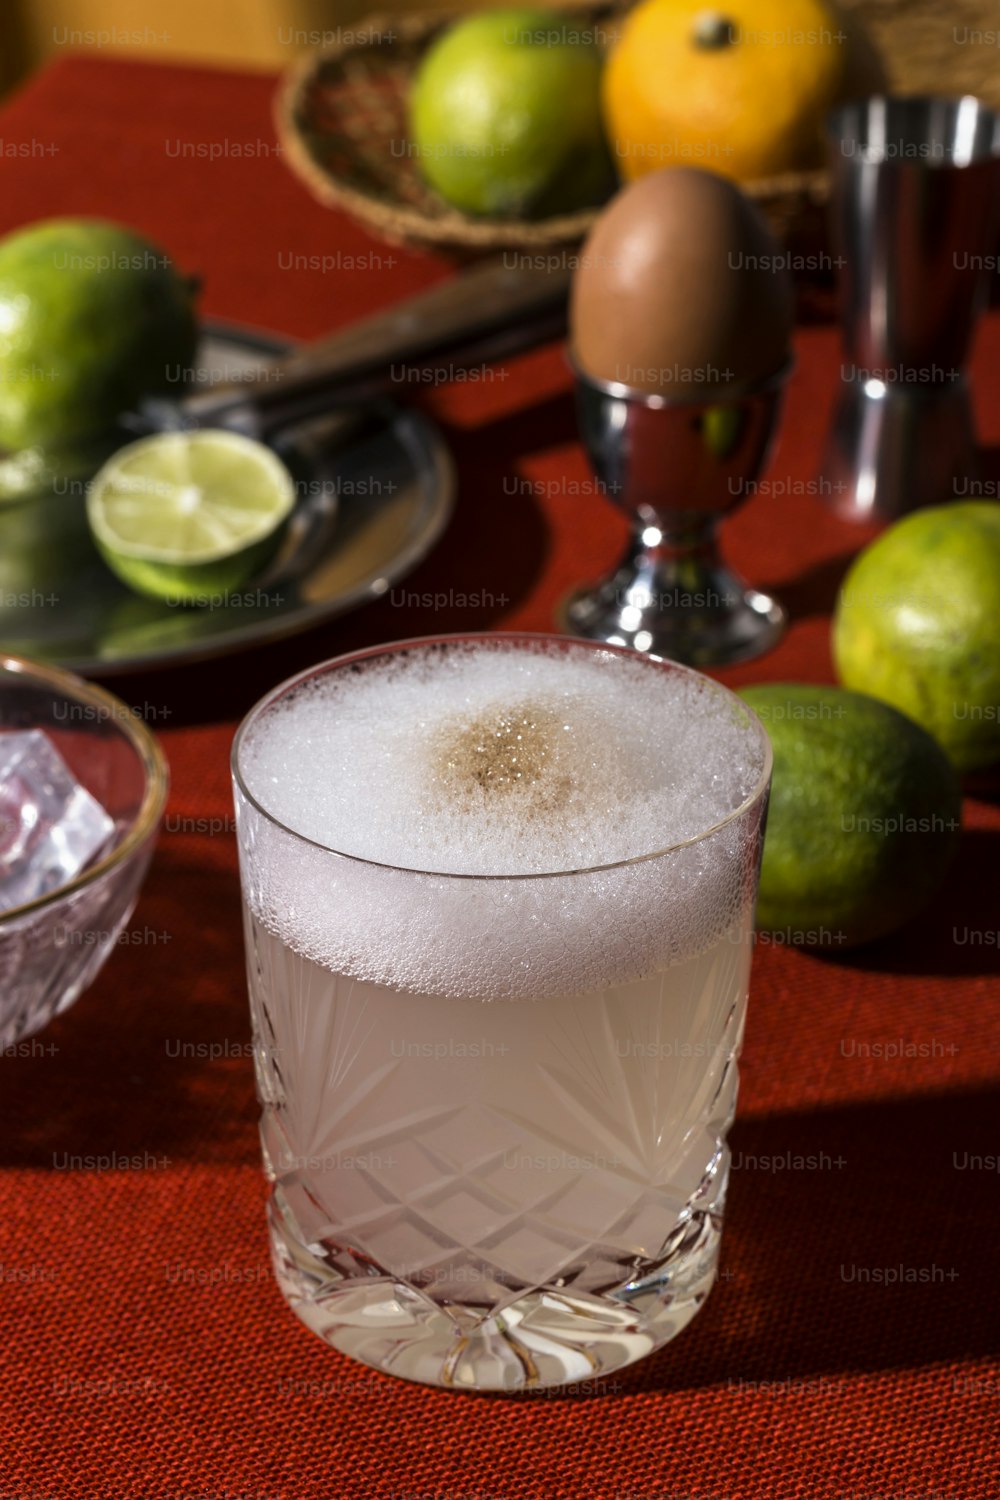 Mix the pisco, lime juice, simple syrup, and egg white in a cocktail shaker. Add ice to fill, and shake vigorously. Alternatively, you can use a blender if you don't have a shaker. Strain into an old-fashioned glass, and sprinkle the Angostura bitters on top of the foam.